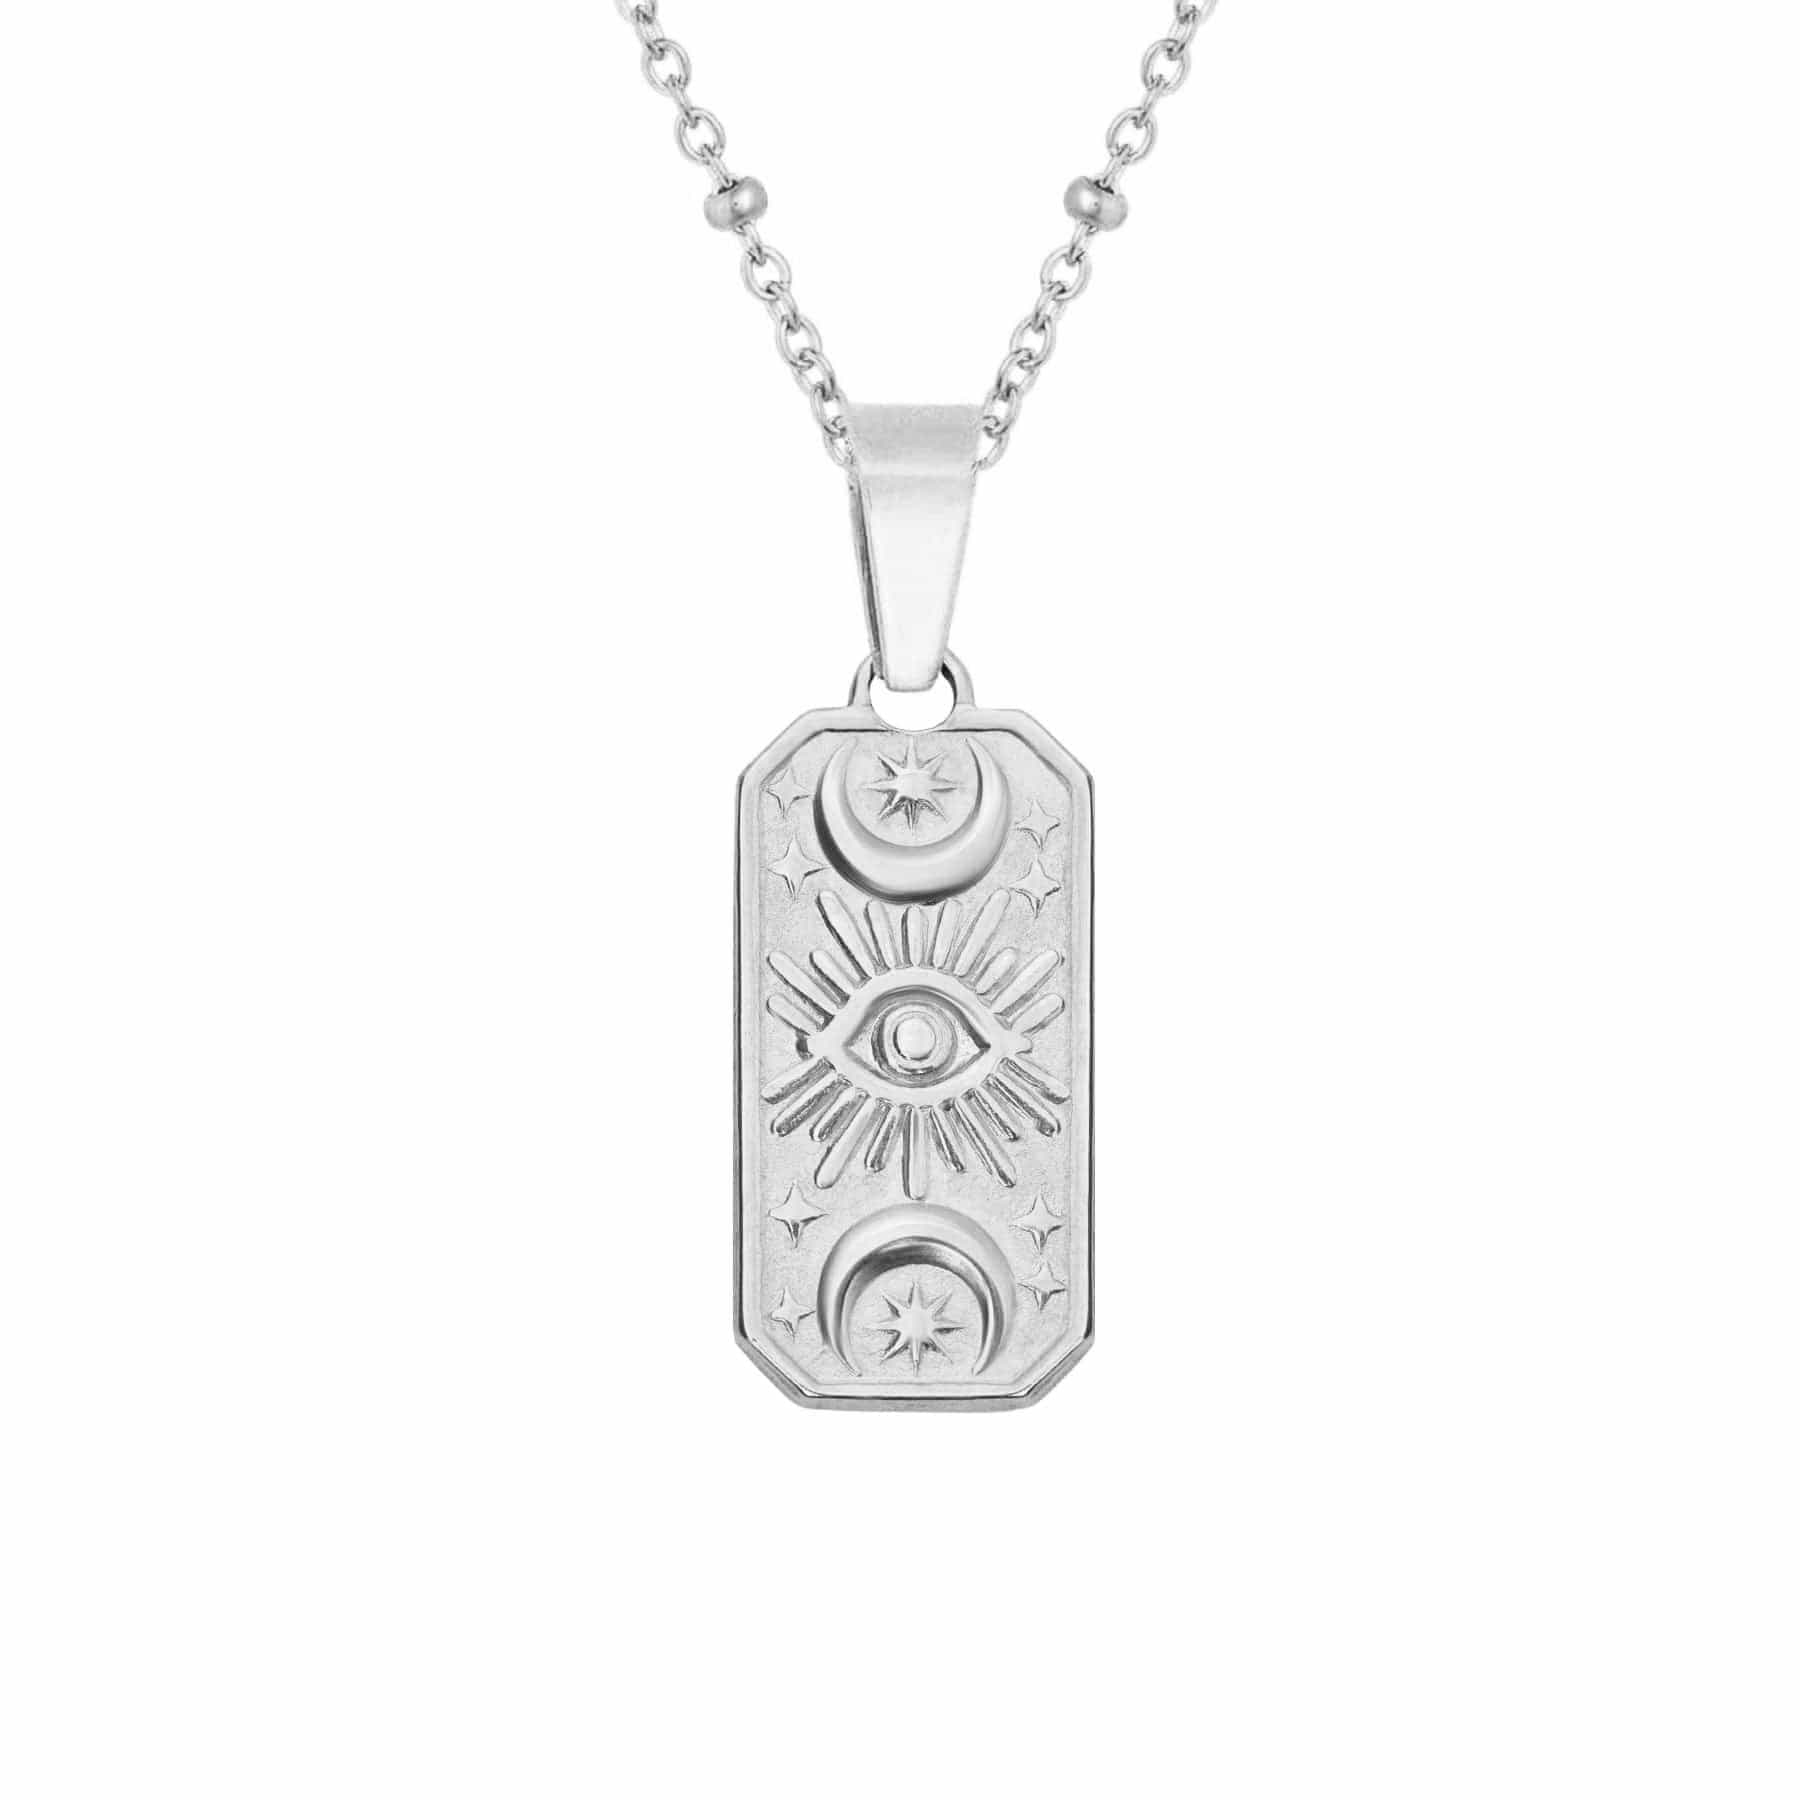 BohoMoon Stainless Steel Spell Necklace Silver